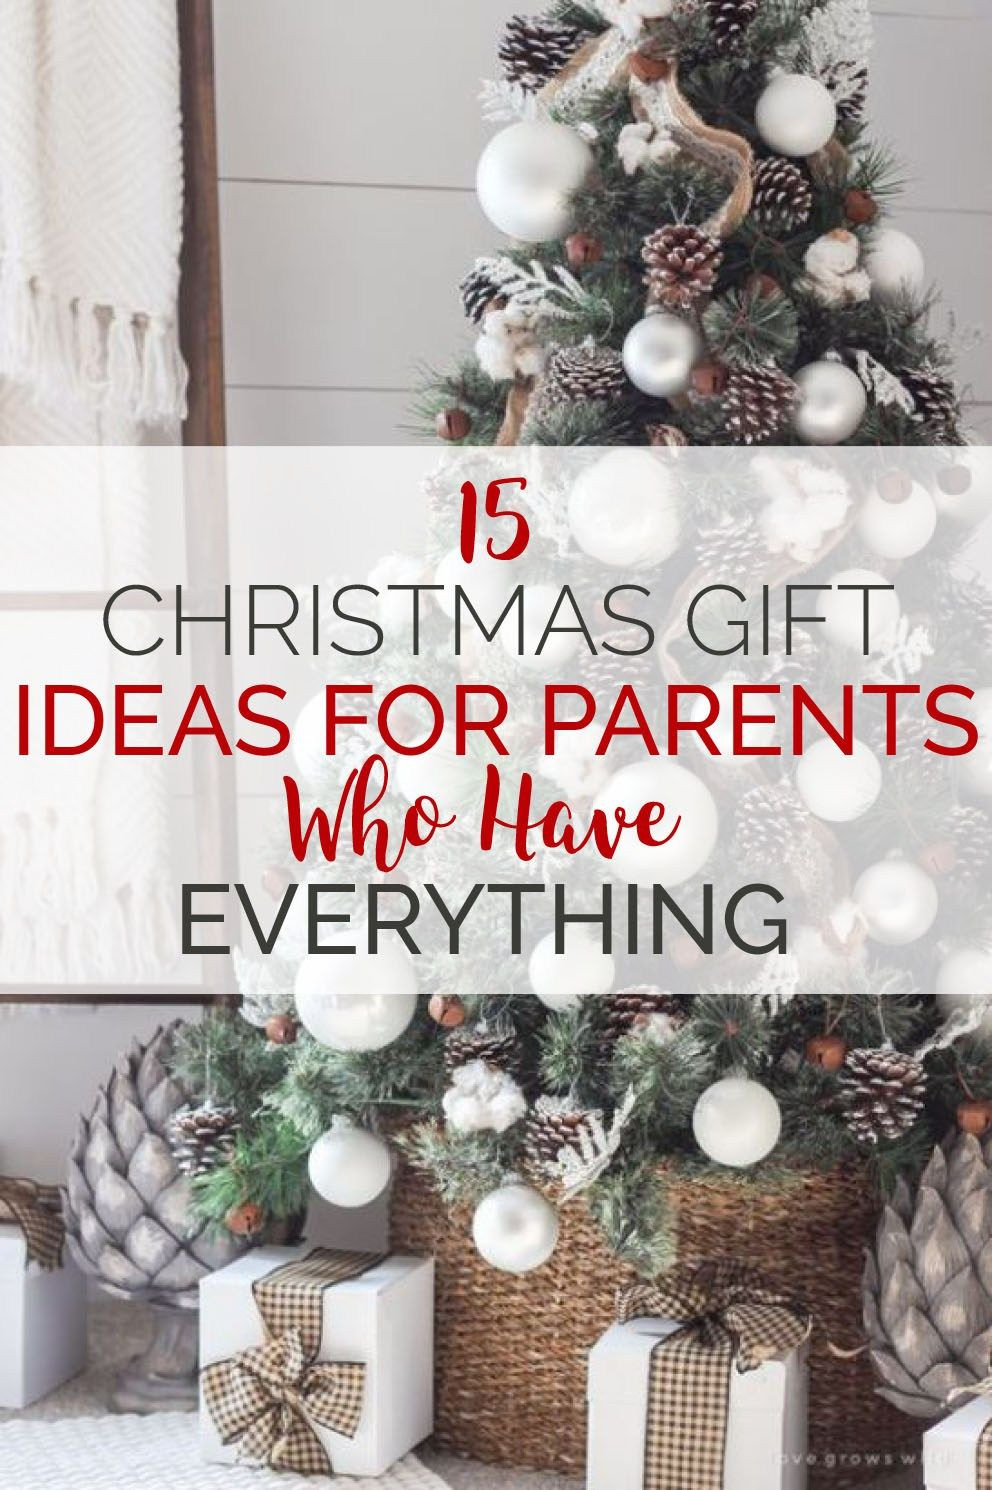 Christmas Gift Ideas People Have Everything
 15 Christmas Gift Ideas For Parents Who Have Everything